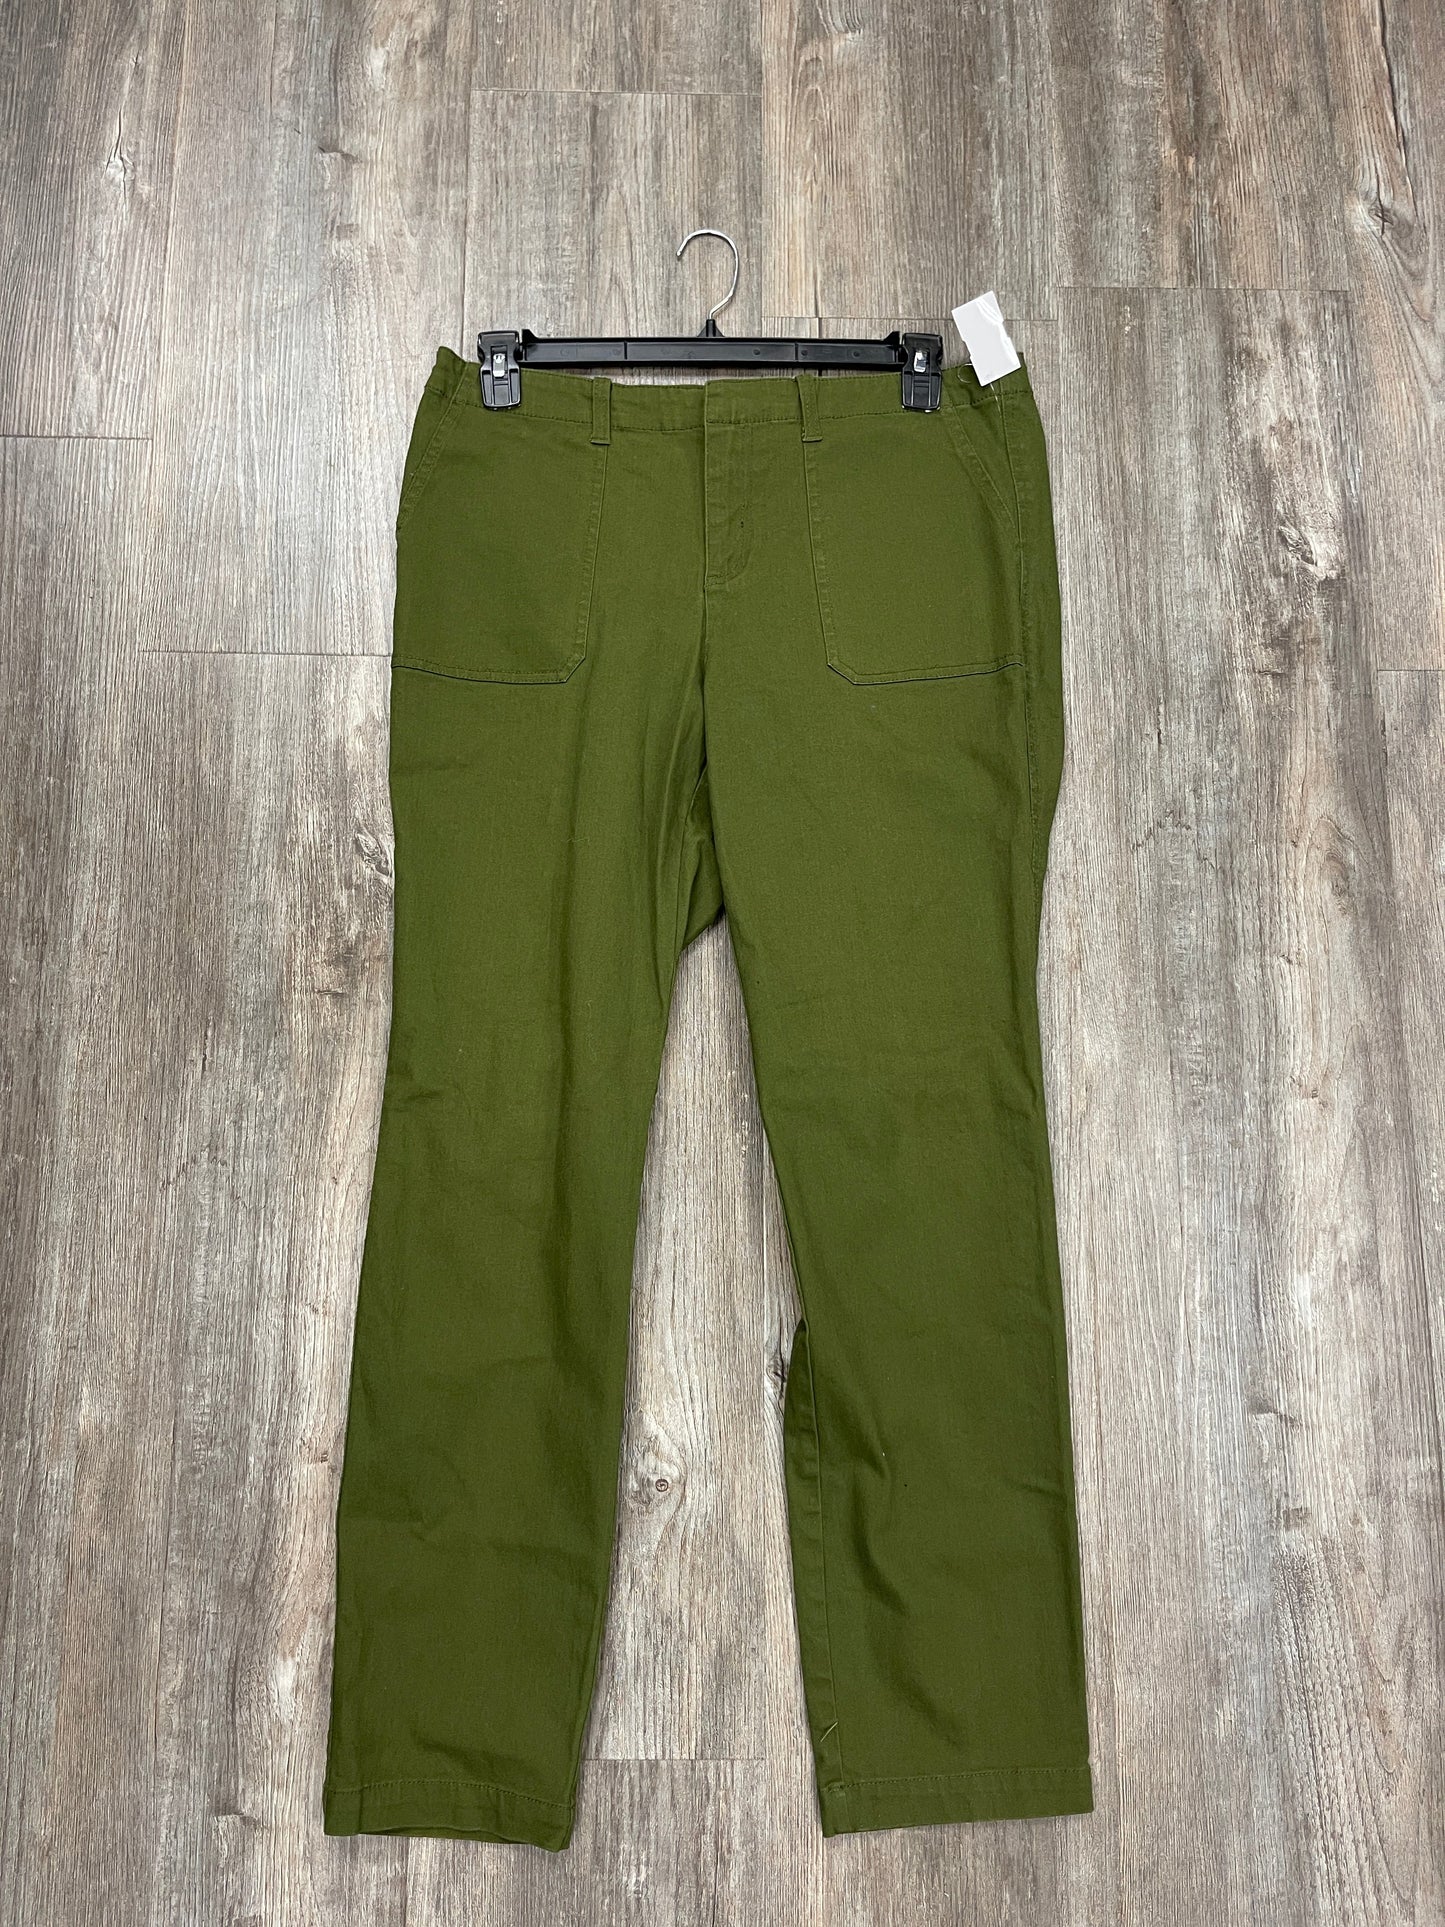 Pants Ankle By Skyes The Limit  Size: 14